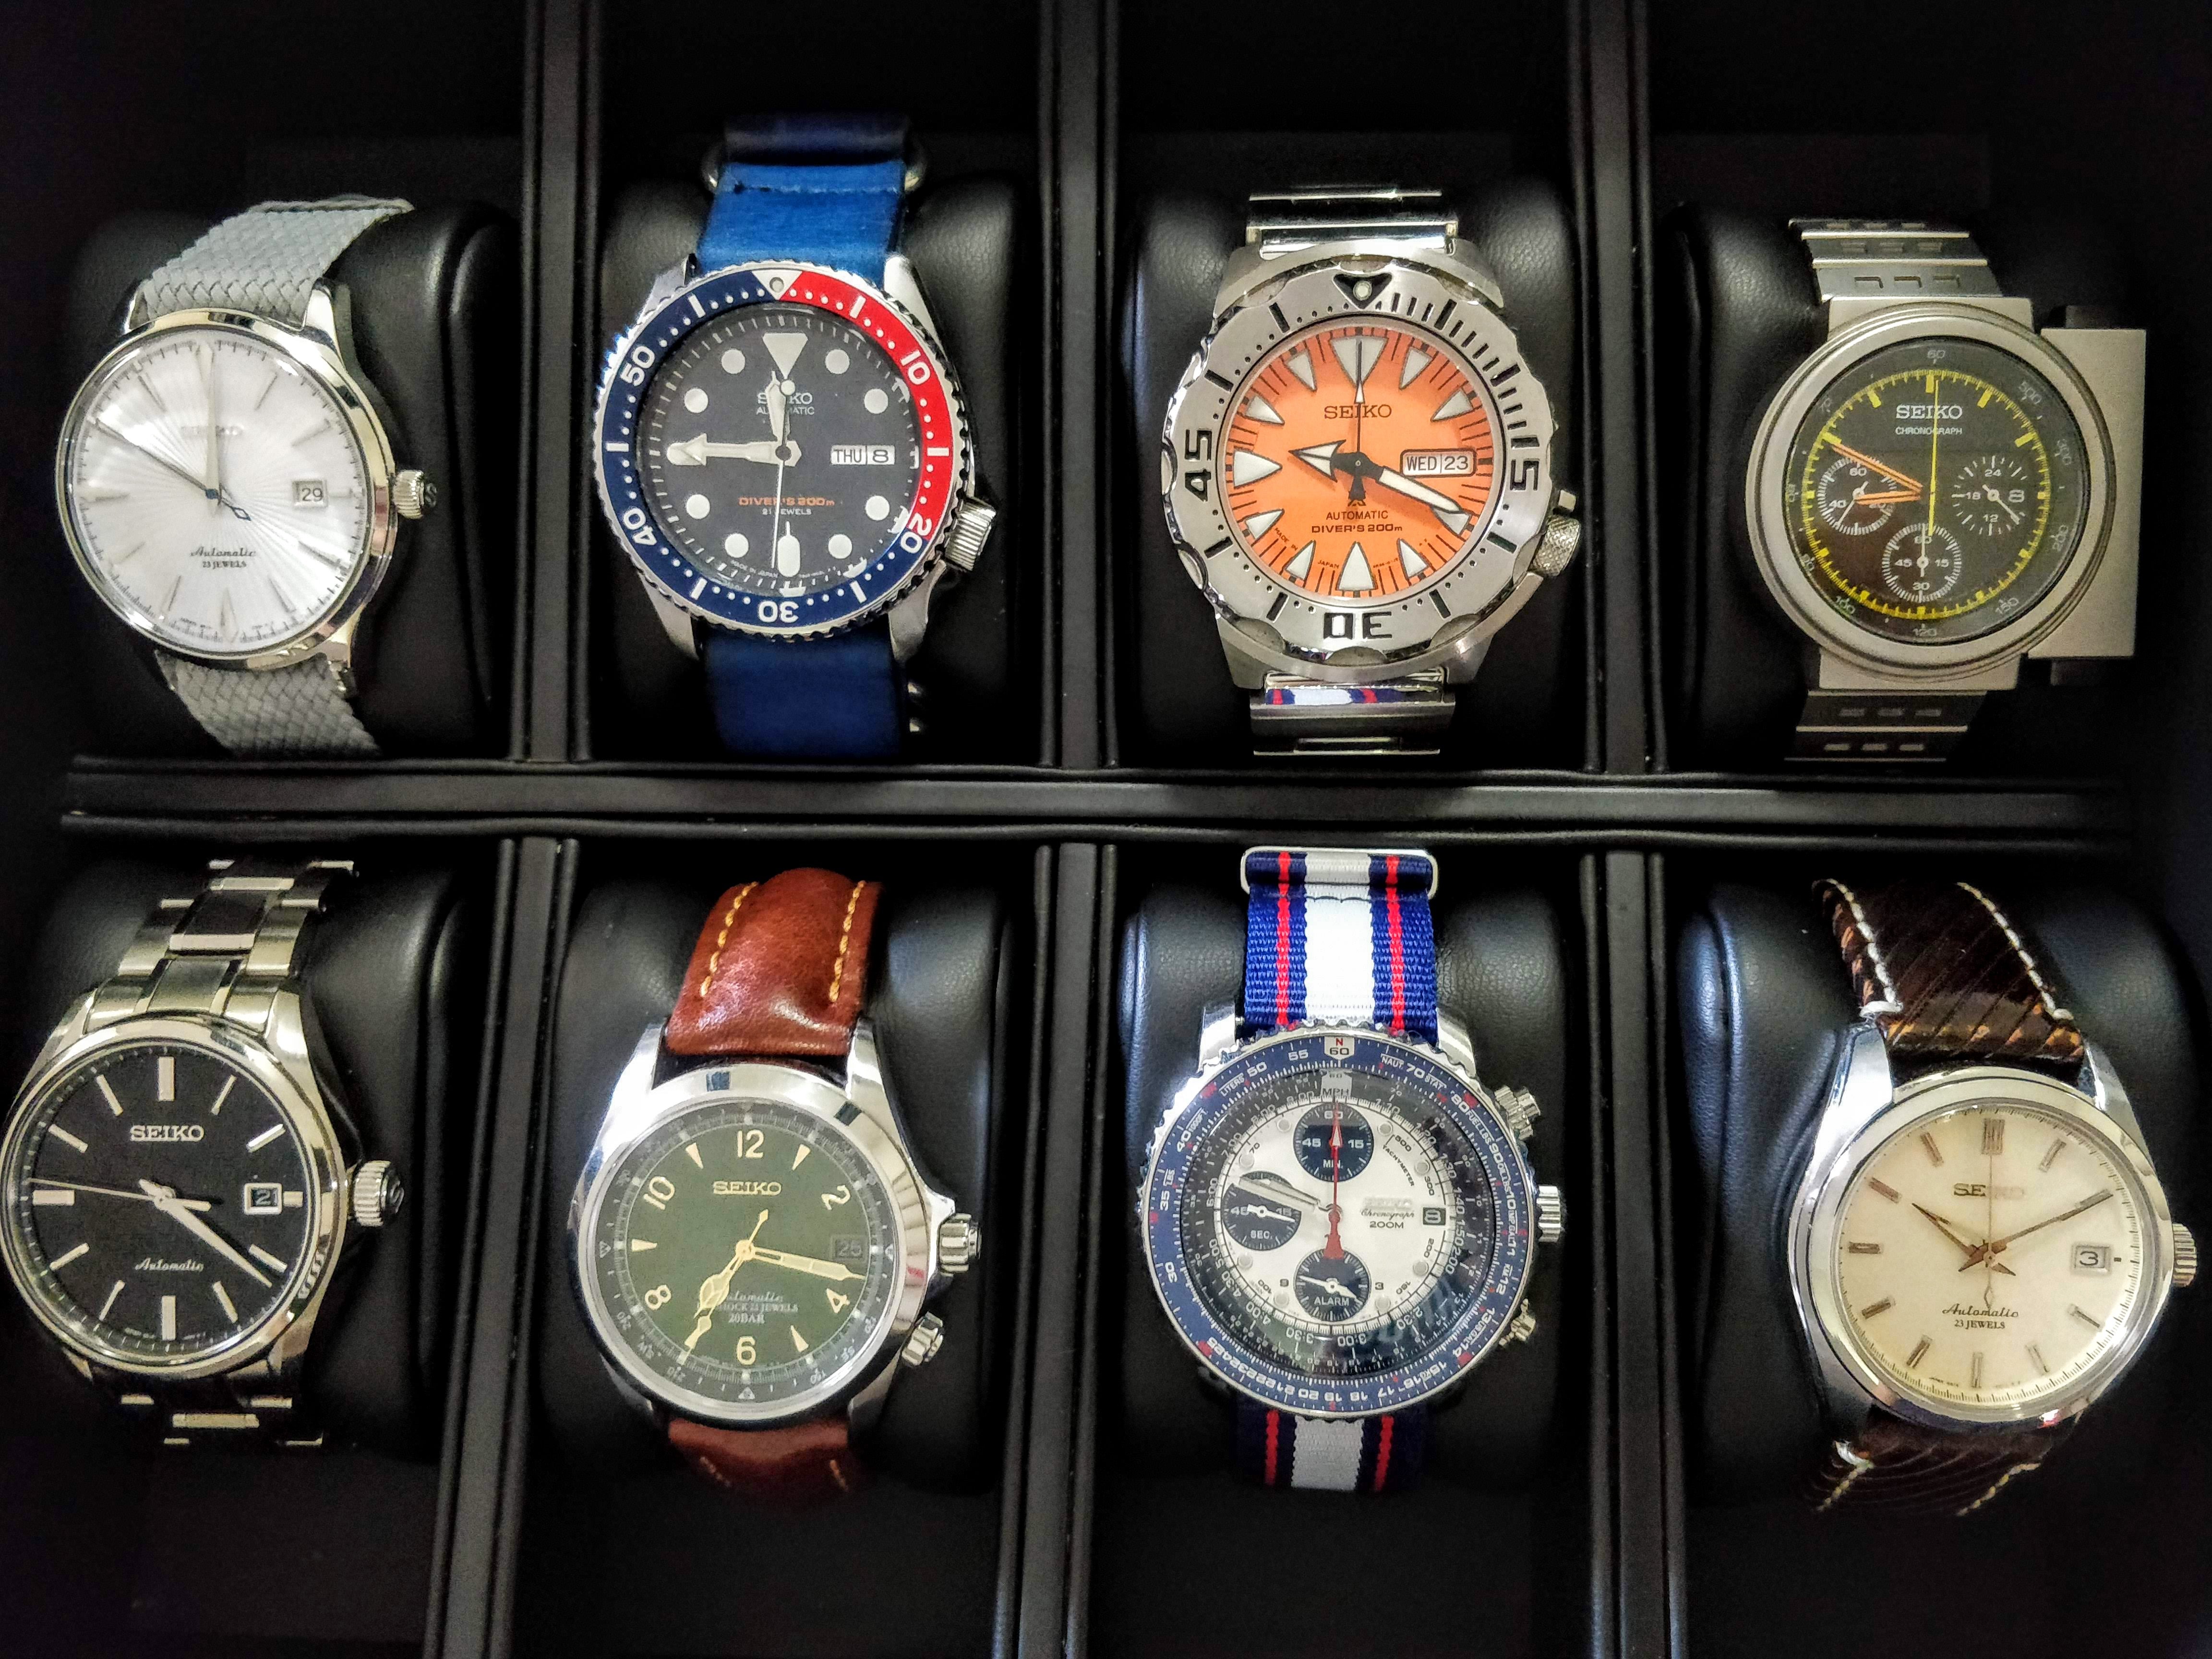 My Collection of Seiko Watches | WatchUSeek Watch Forums